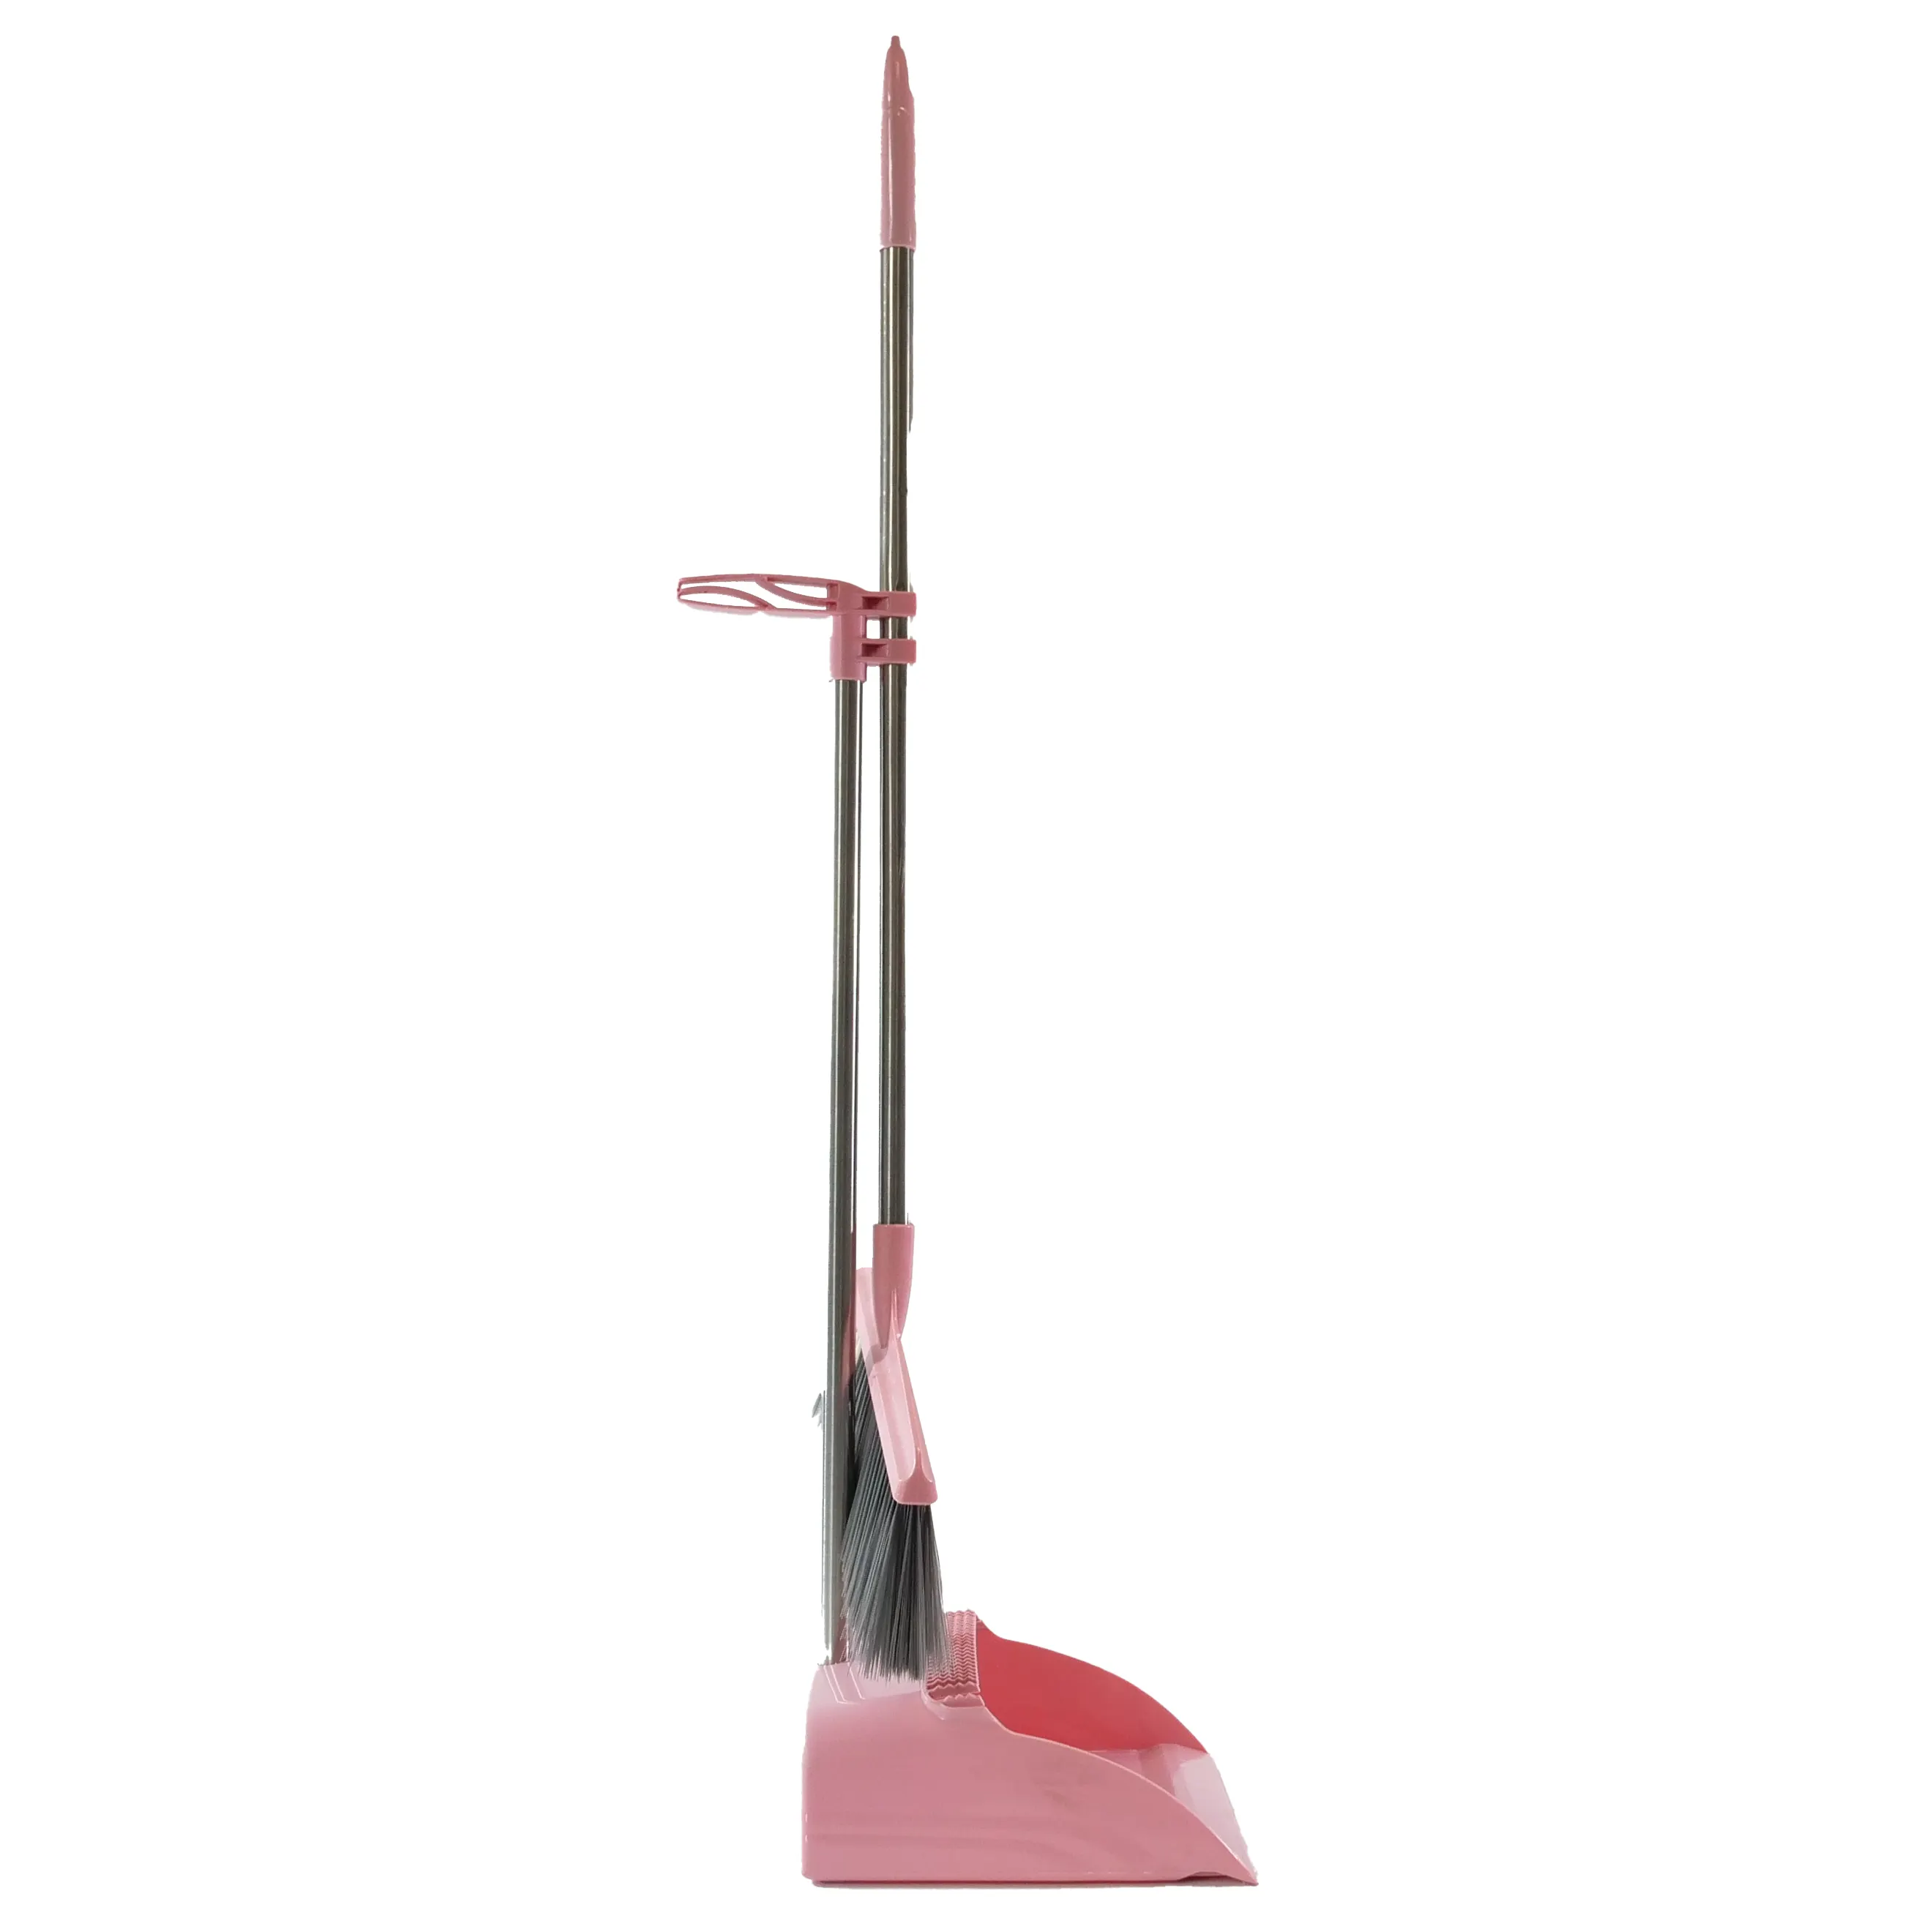 Latest Design Manufactures With Colorful Broom And Squeegees Handles